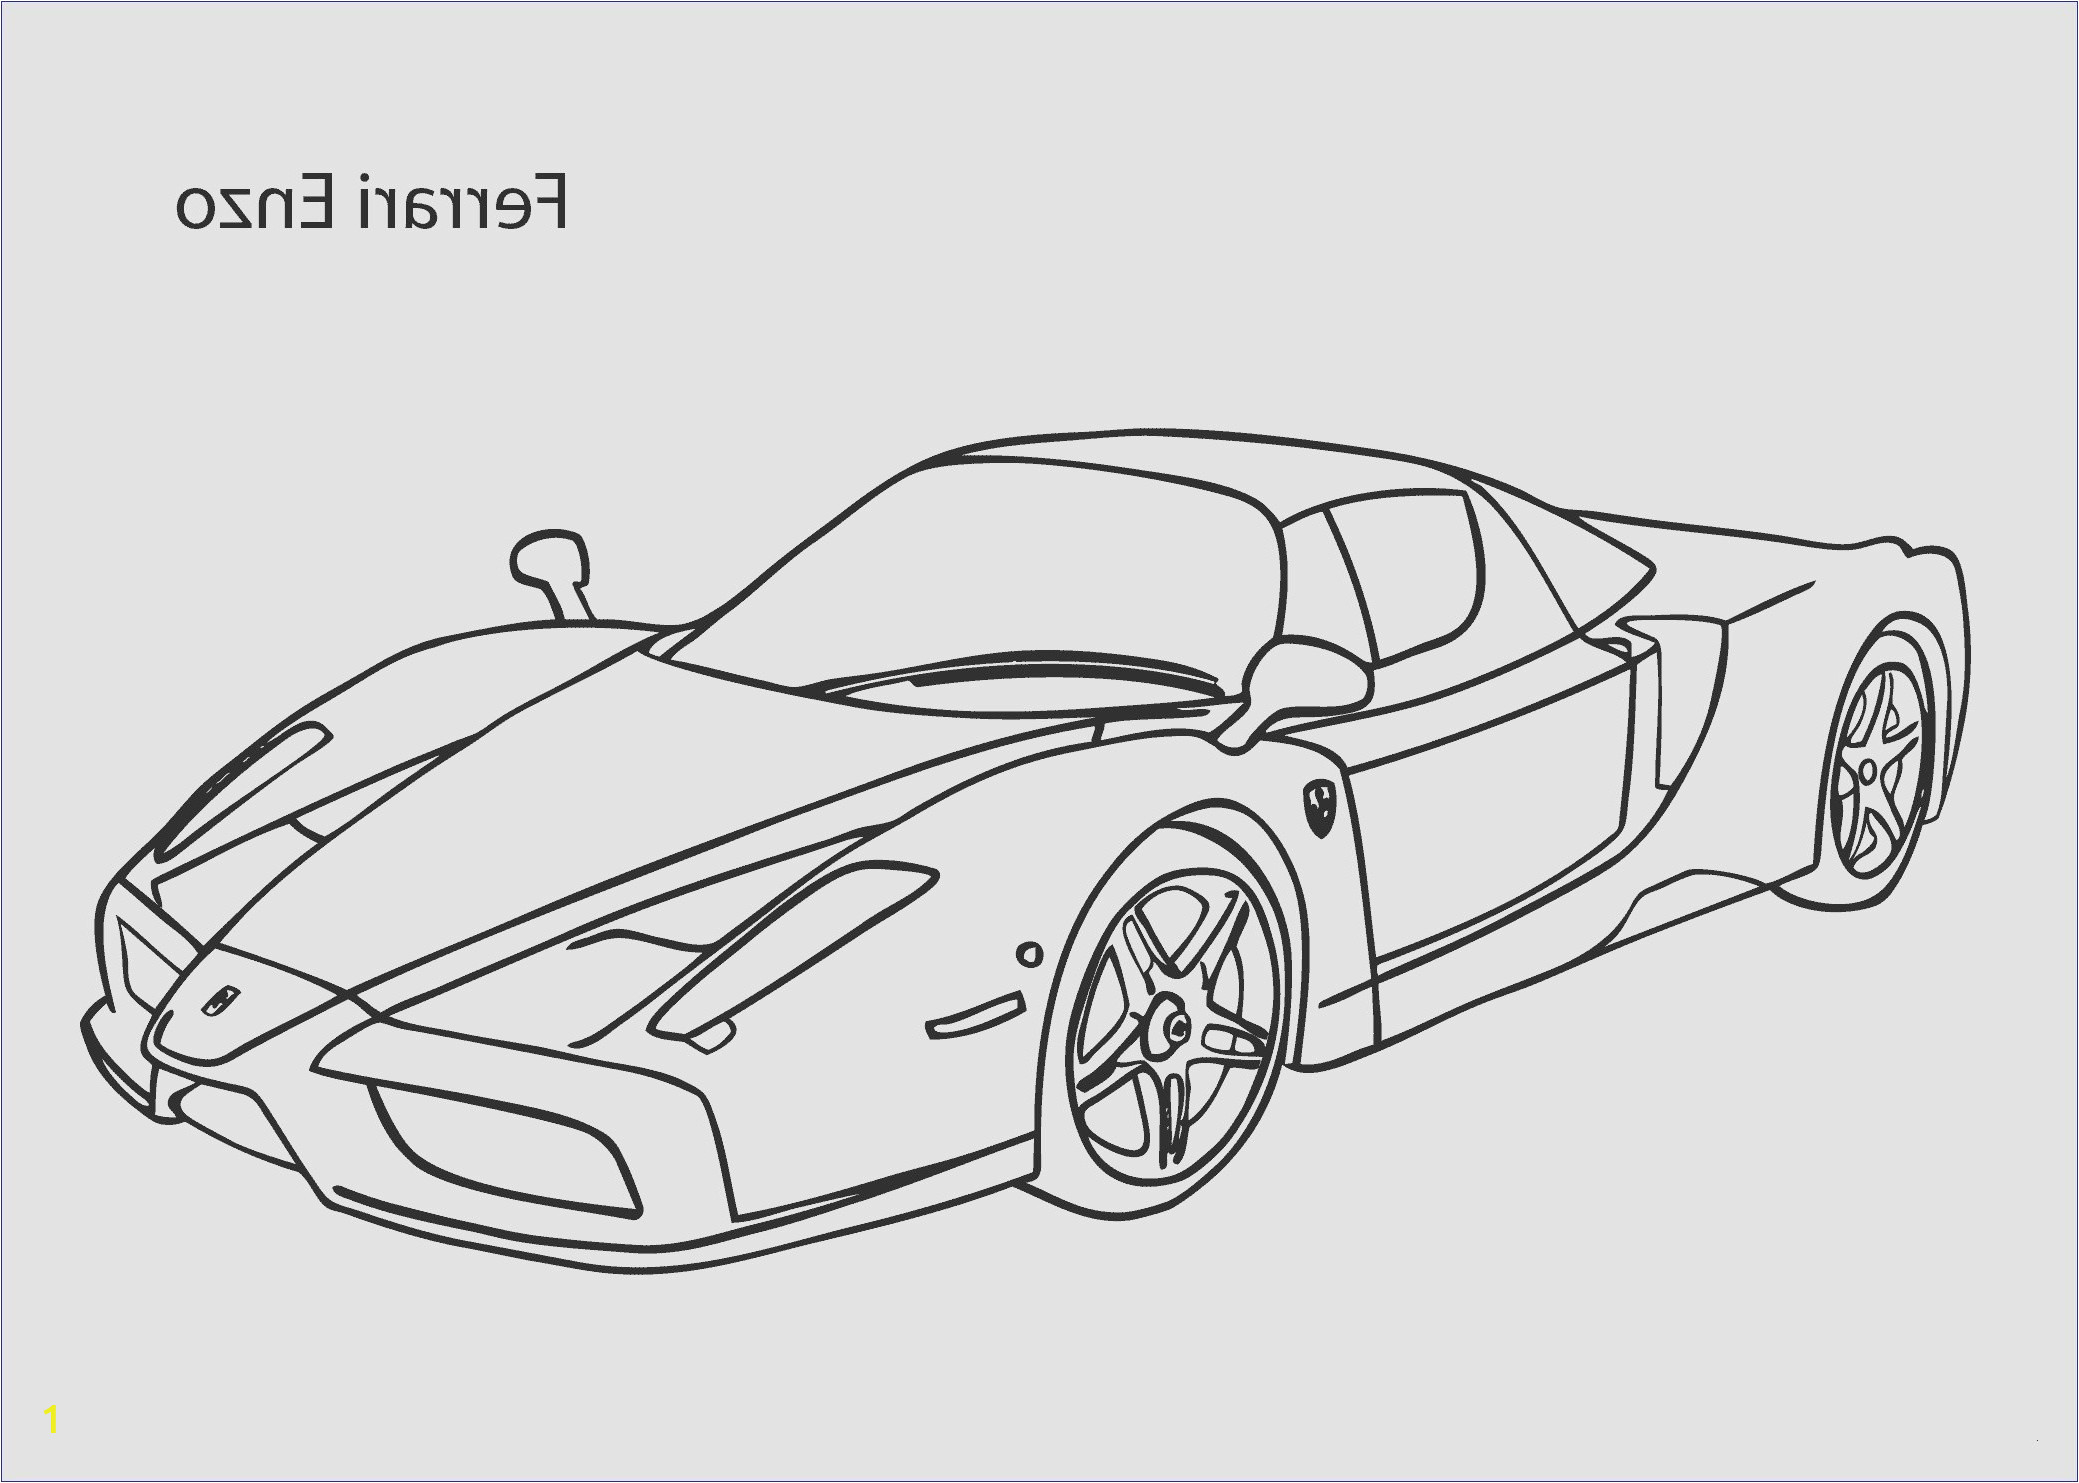 Car Coloring Pages for Kids 27 Unique Image Car Coloring Page to Print